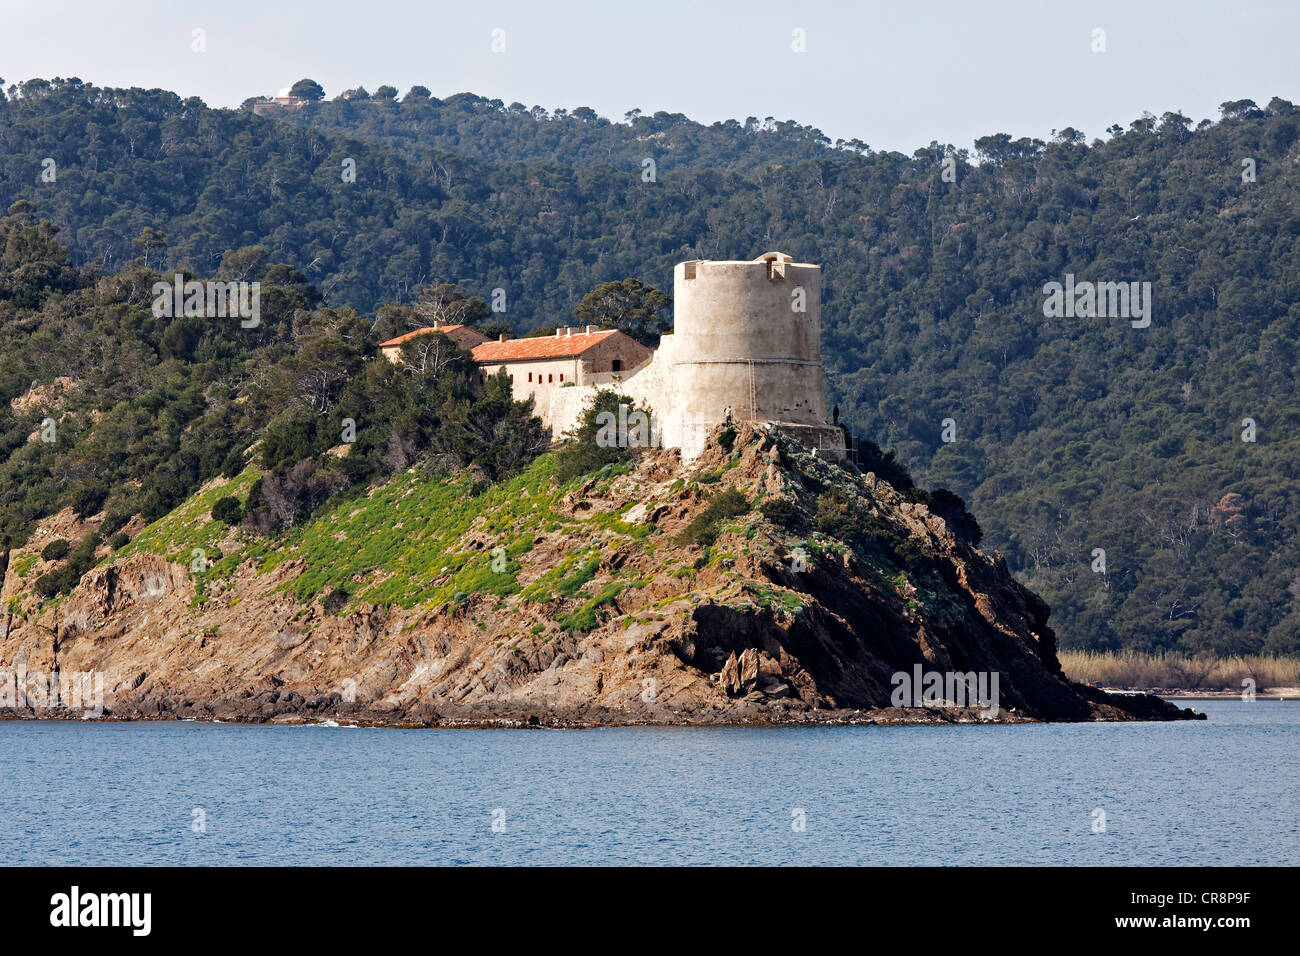 Old fortress of Port-Man on a cliff, Port-Cros National Park, Iles d'Hyères islands, Provence-Alpes-Côte d'Azur, France, Europe Stock Photo